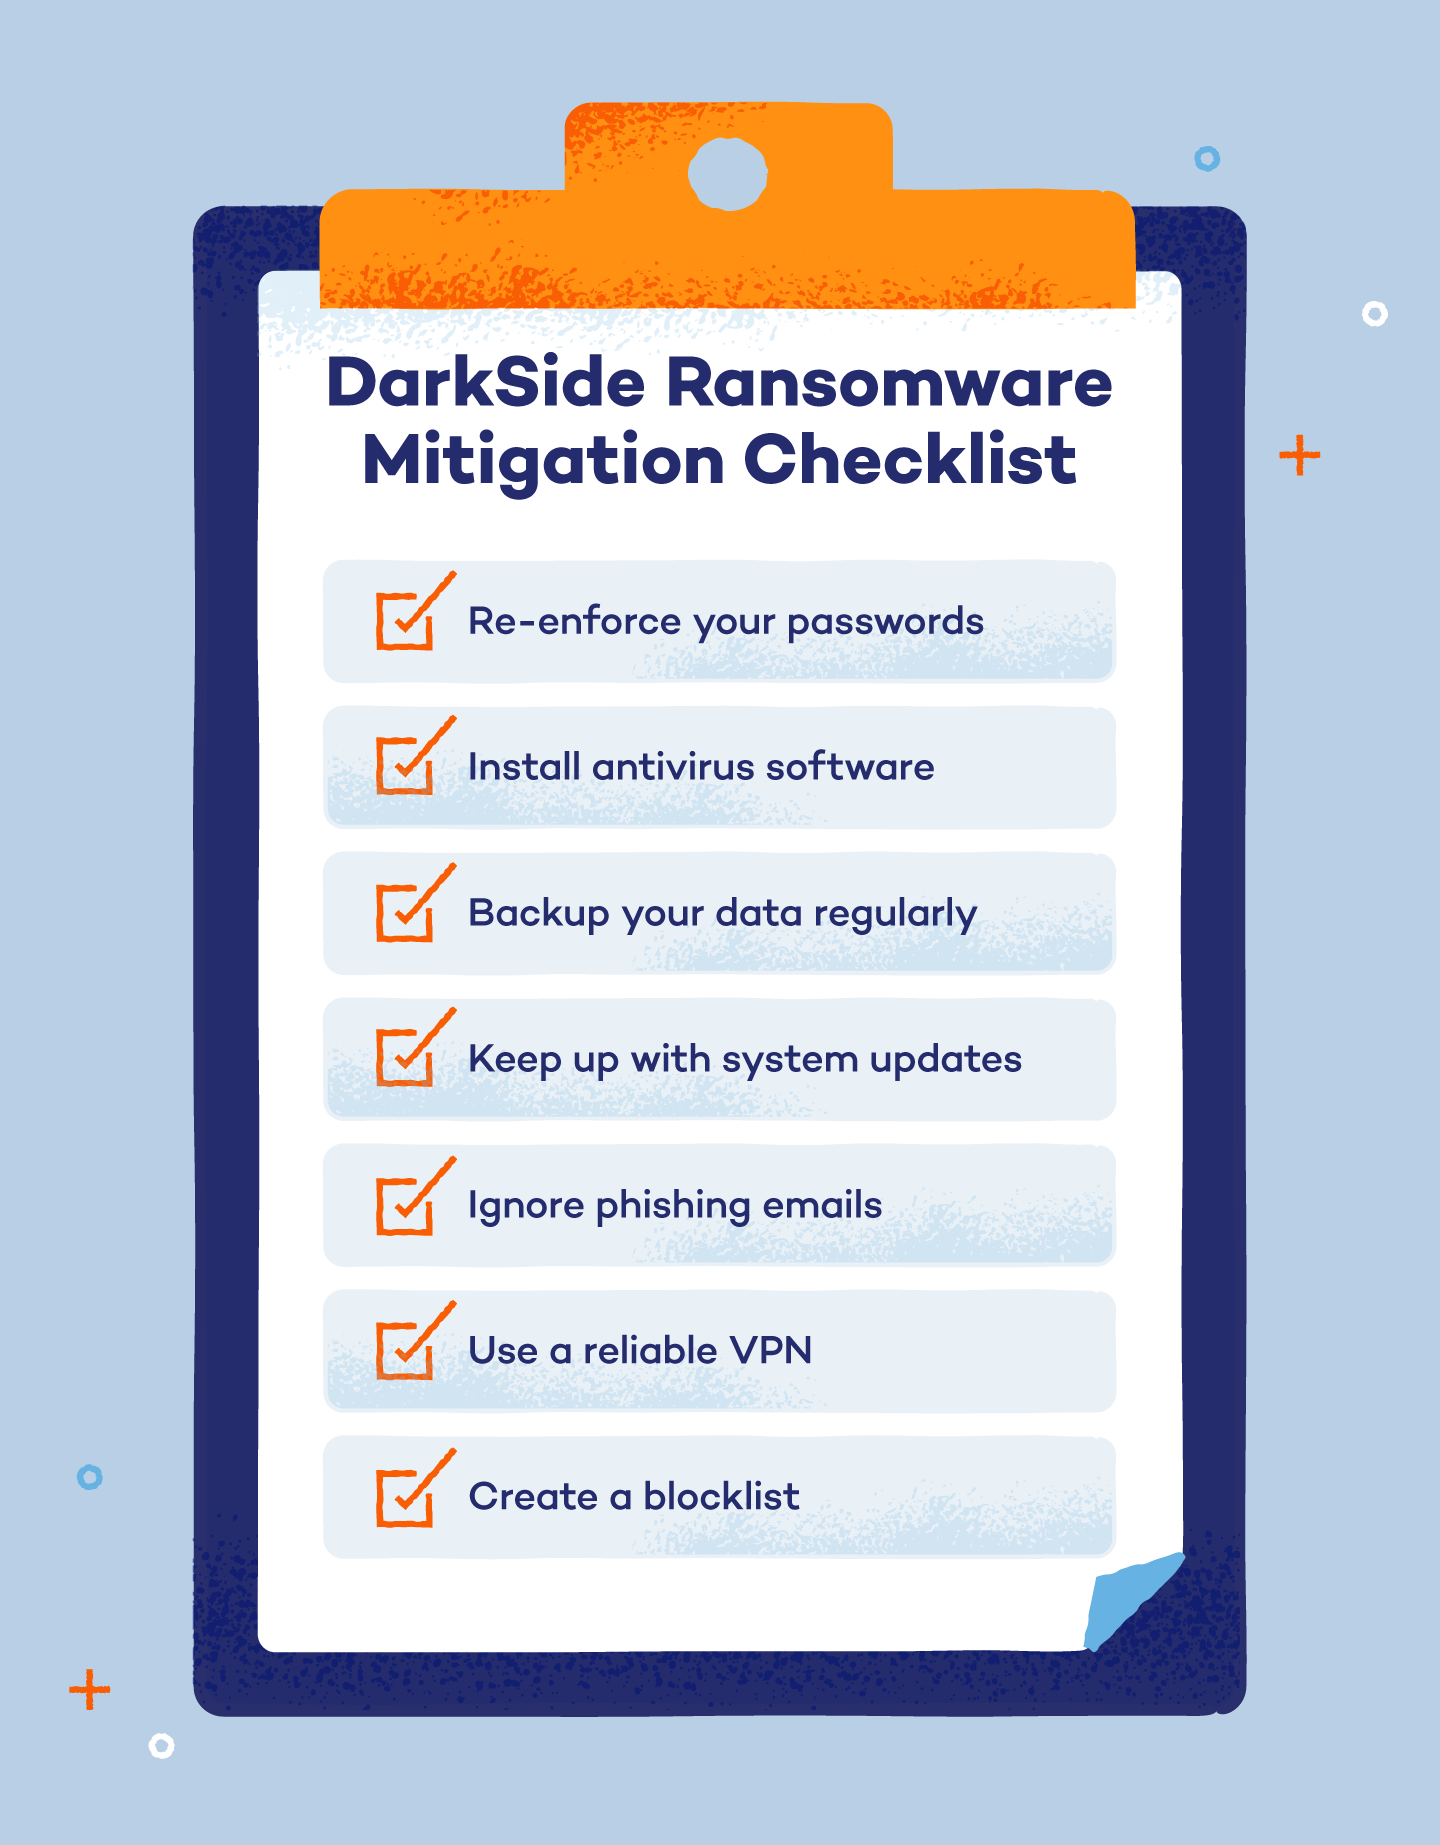 An illustrated checklist of ways to protect oneself against DarkSide ransomware